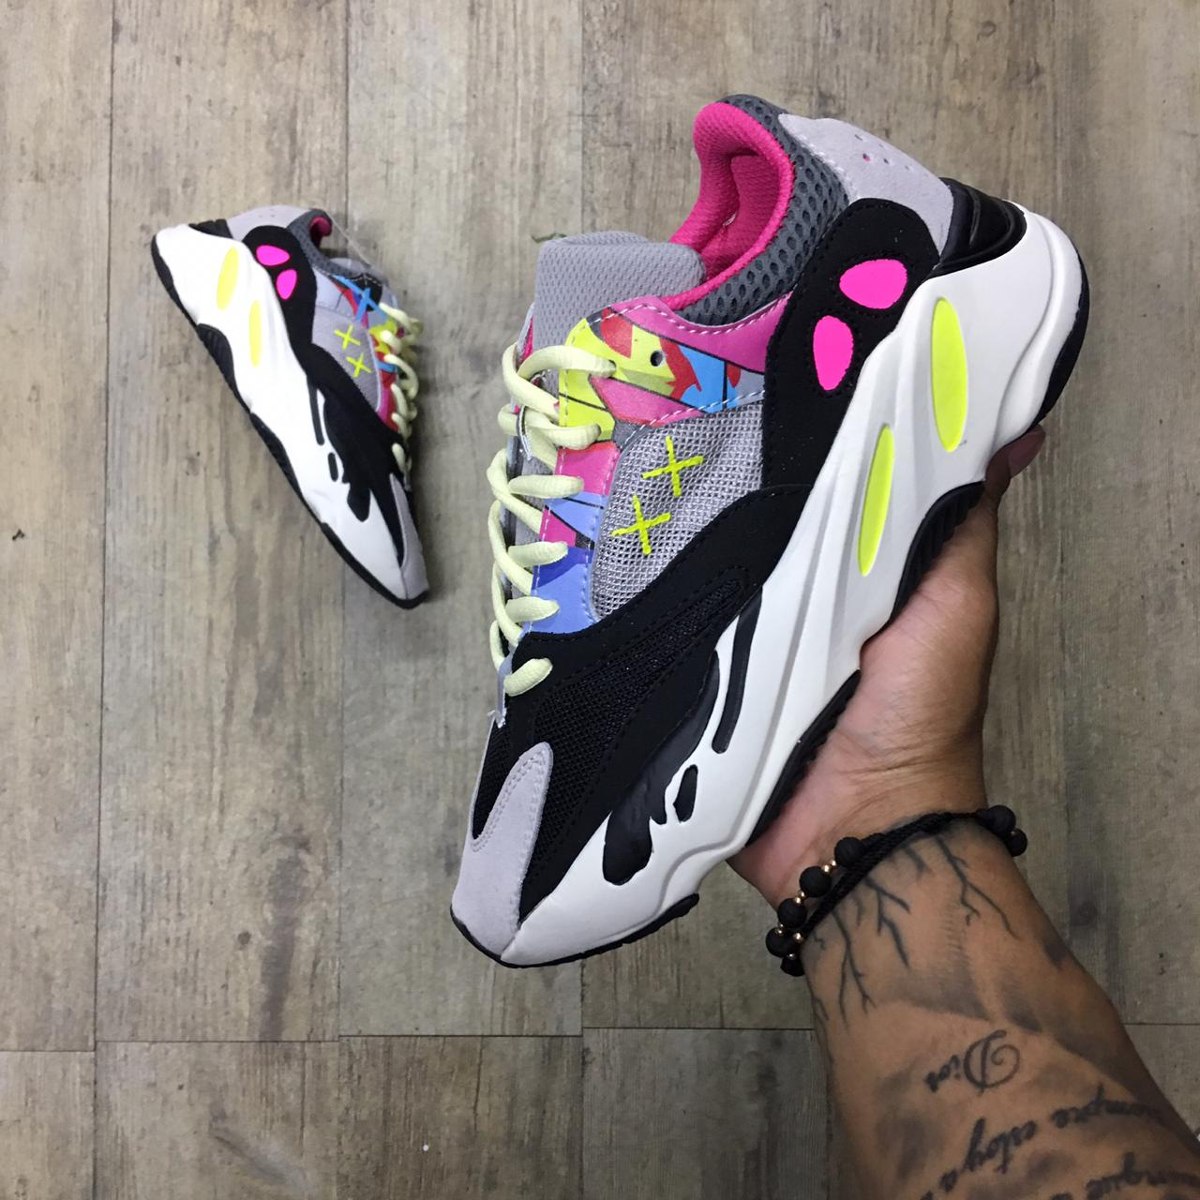 yeezy boost 700 hombre shopping f4a0d 6eb12